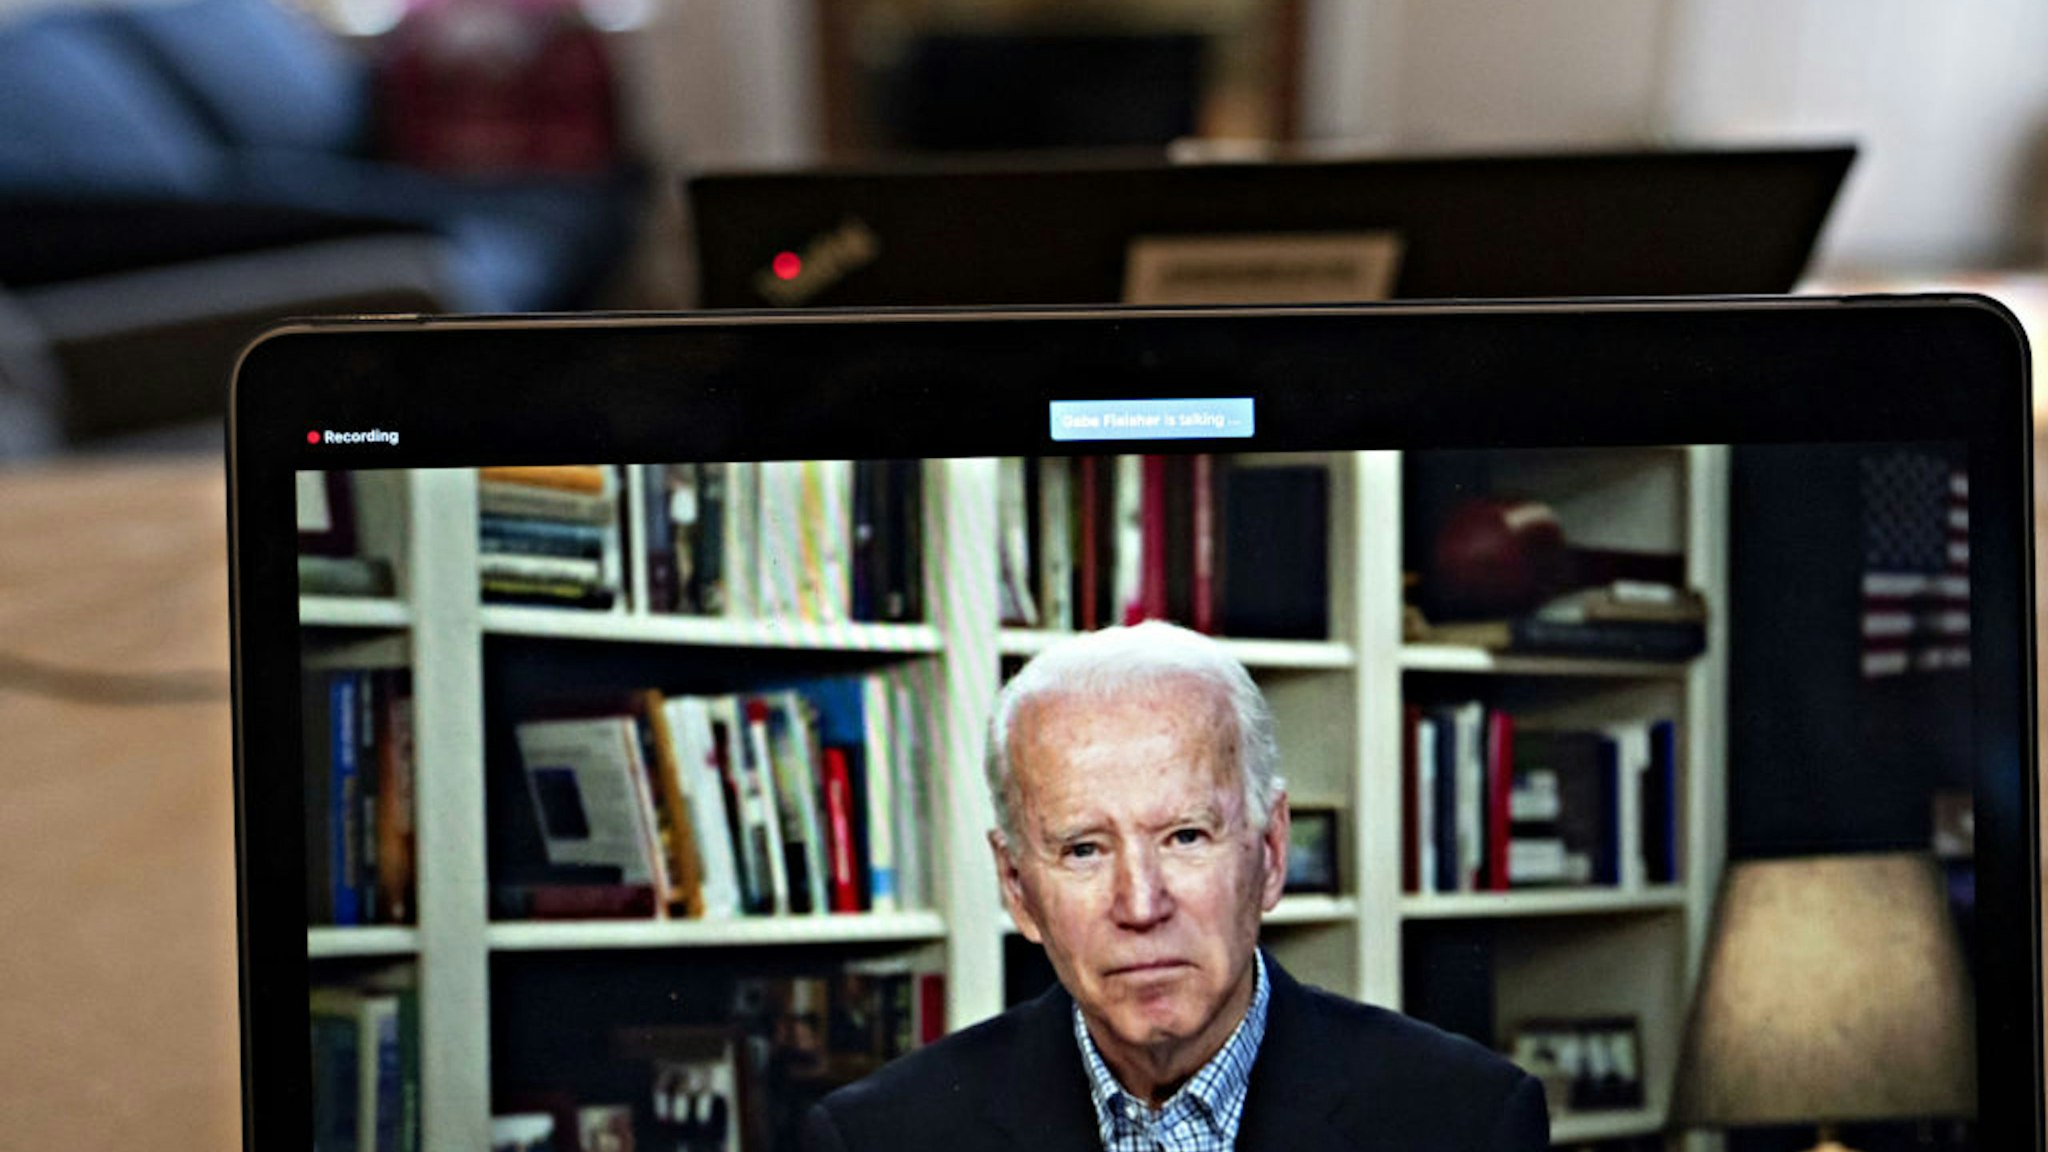 Former Vice President Joe Biden, 2020 Democratic presidential candidate, listens to a question during a virtual press briefing on a laptop computer in this arranged photograph in Arlington, Virginia, U.S., on Wednesday, March 25, 2020. During the livestreamed news conference today, Biden said he didn't see the need for another debate, which the Democratic National Committee had previously said would happen sometime in April.